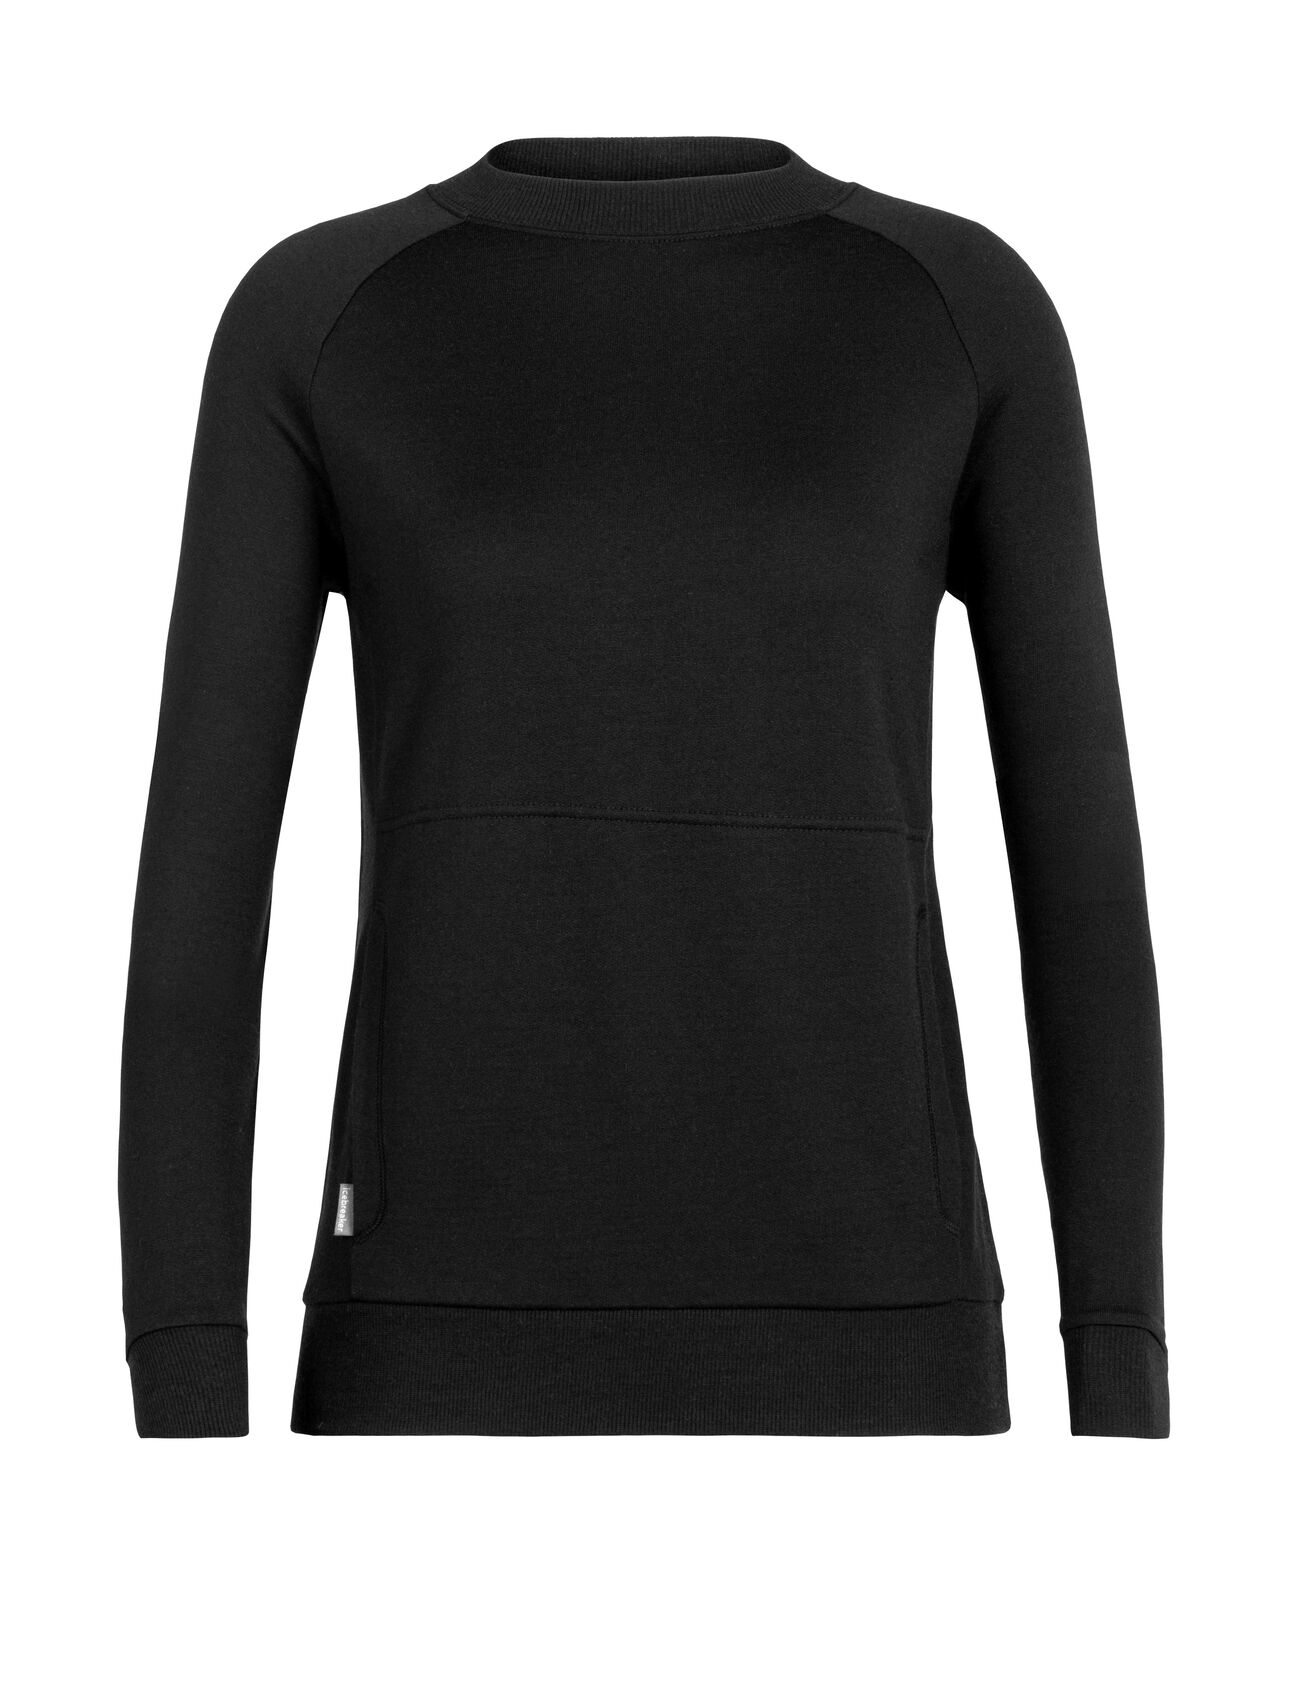 Womens Merino Helliers Terry Long Sleeve Sweatshirt A classic, everyday sweatshirt ideal for cool-weather layering, the Helliers Terry Long Sleeve Sweatshirt features 100% merino wool terry fabric for super-soft comfort and natural breathability.